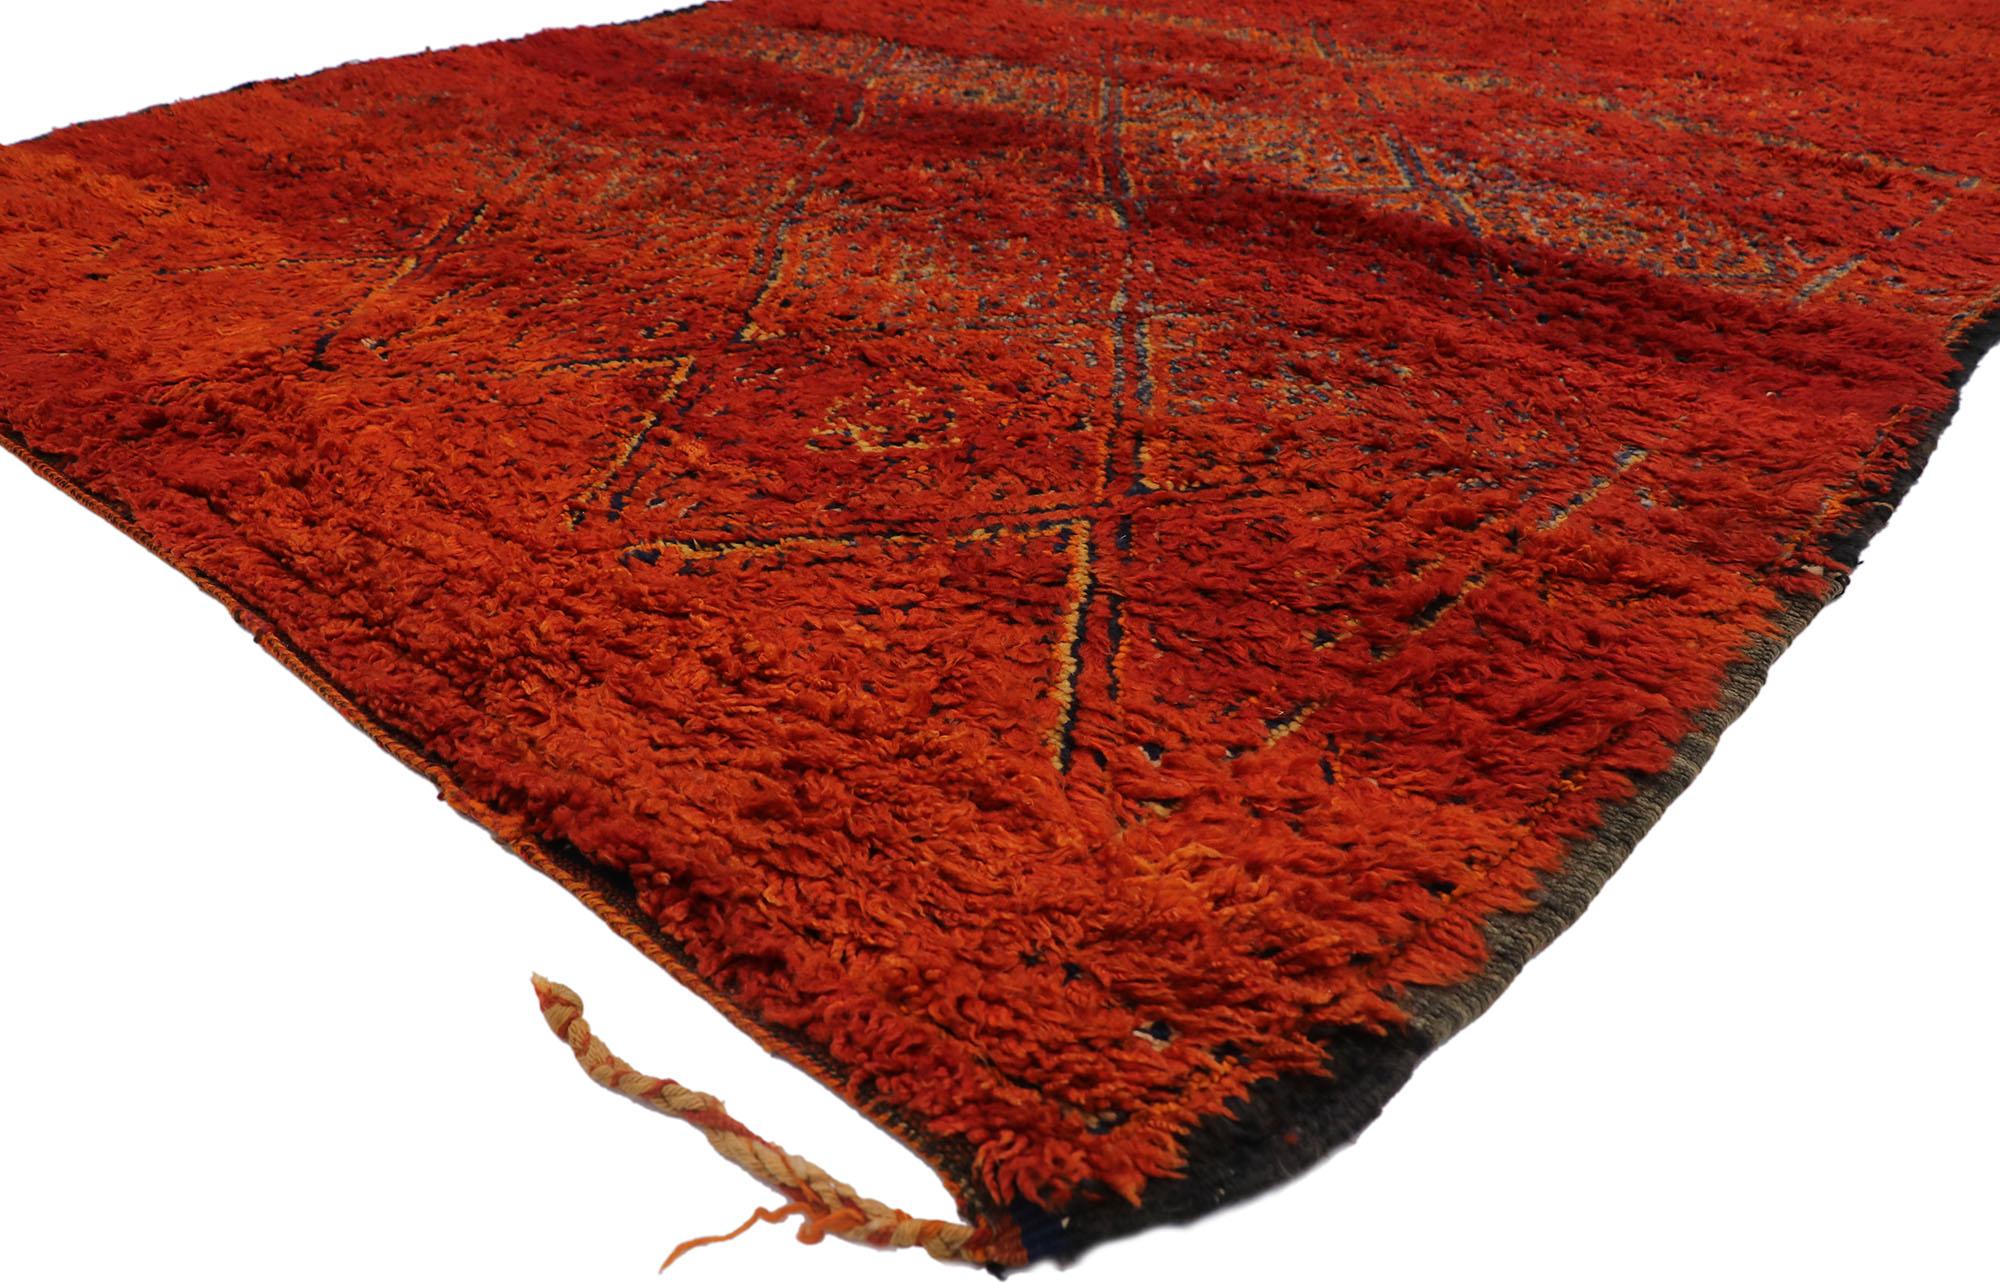 21333 Vintage Red Beni MGuild Moroccan Rug, 07'05 x 12'04.

Capturing the vibrancy of Marrakech, the Red City, this vintage Beni M'Guild Moroccan rug is a mesmerizing embodiment of Midcentury Modern design. Hand-knotted with precision, the plush